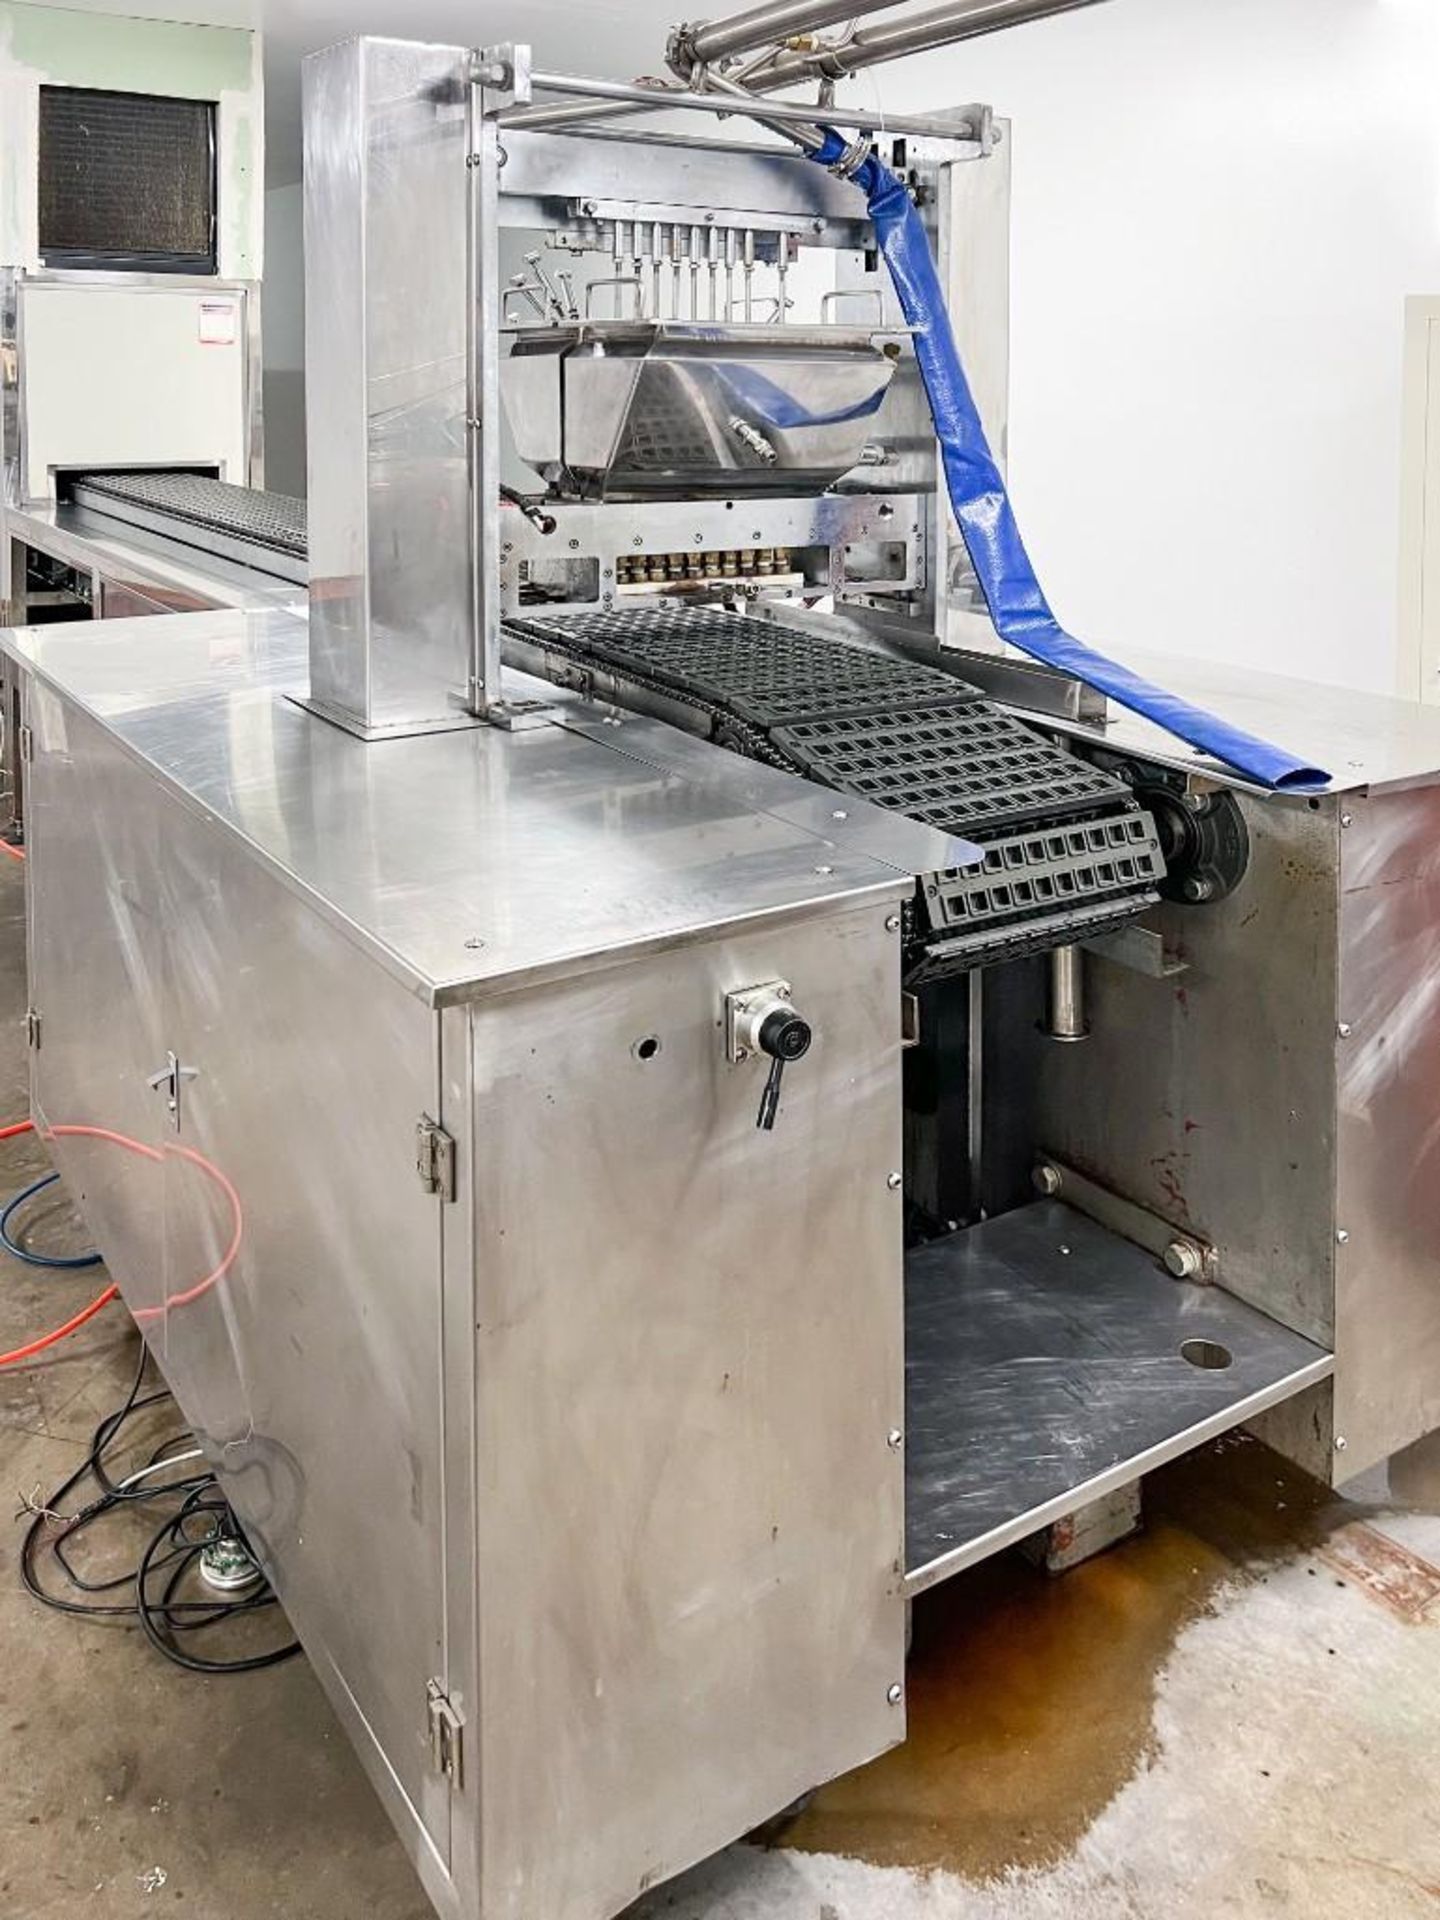 Fully Automatic Gummy Production Line & Kitchen - Image 2 of 13